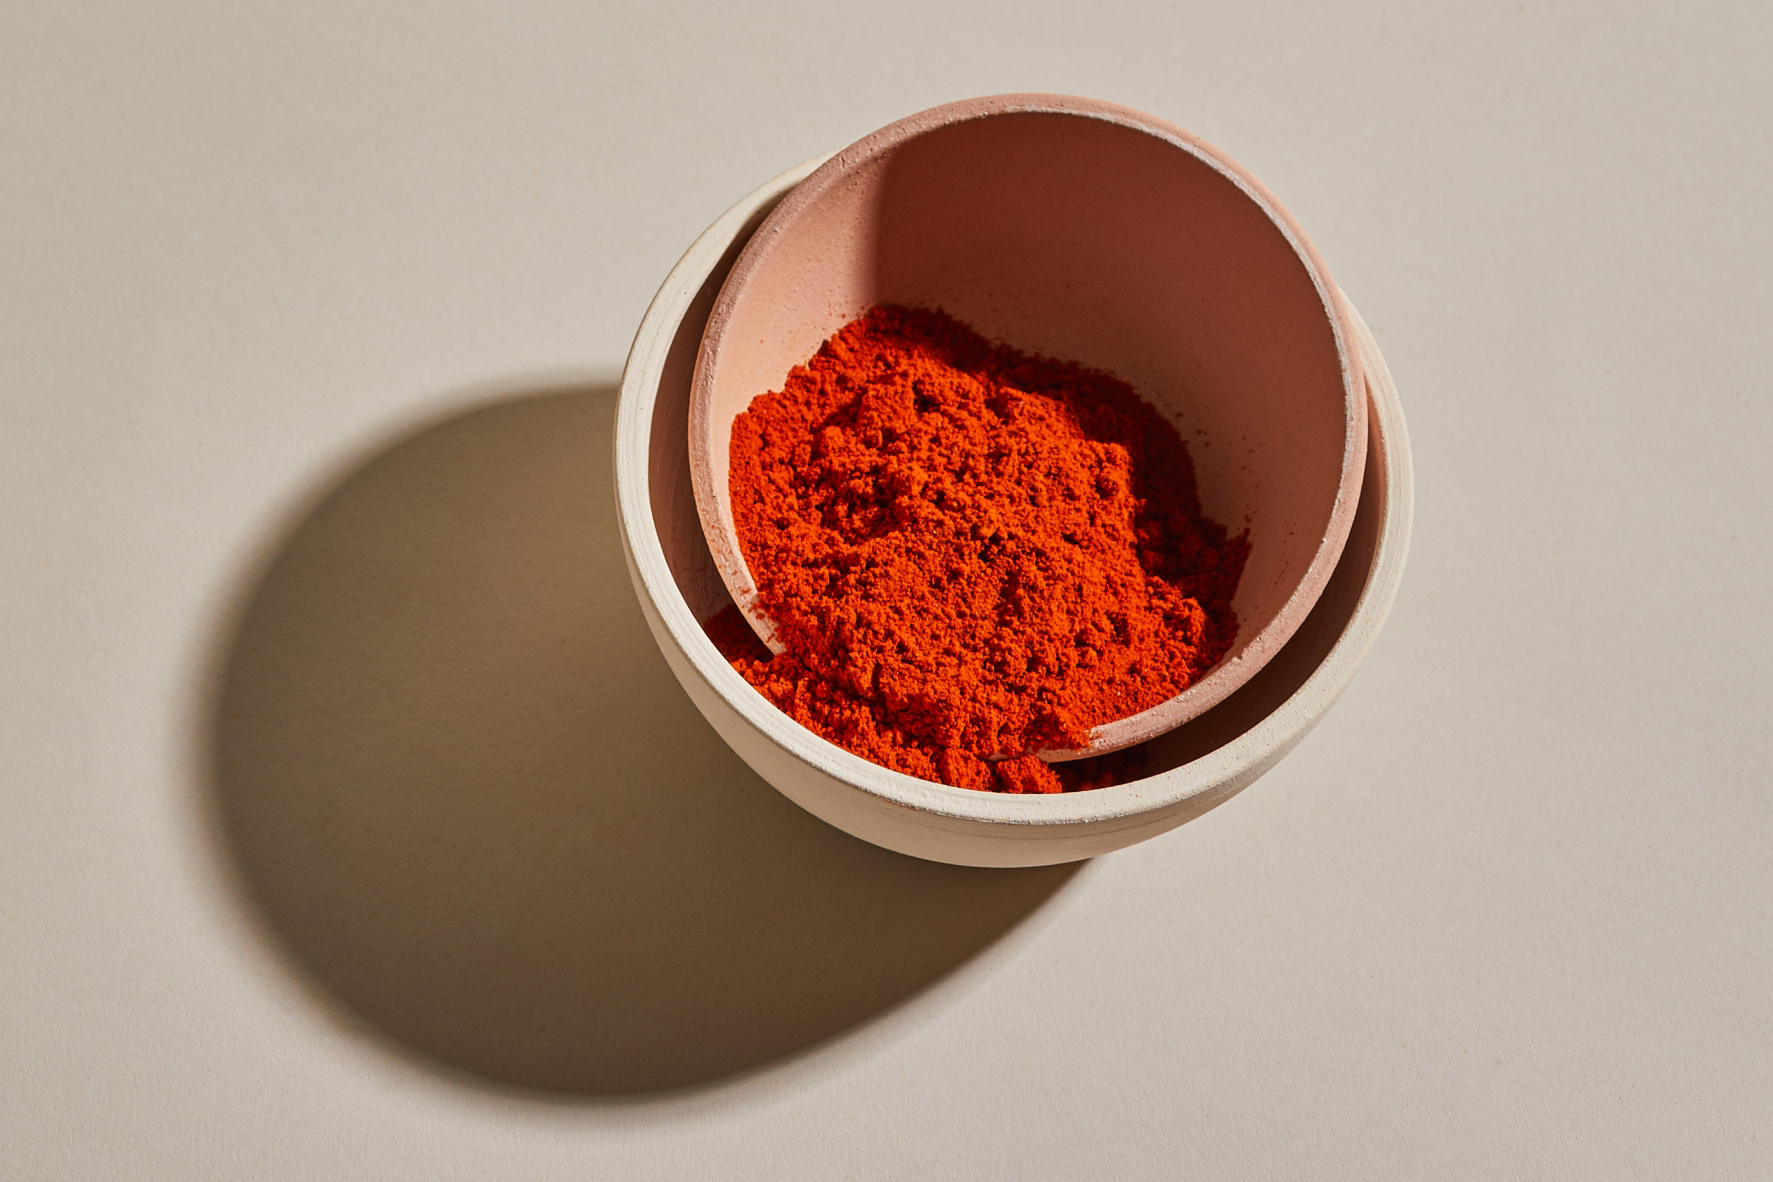 Spanish paprika from the Spice House